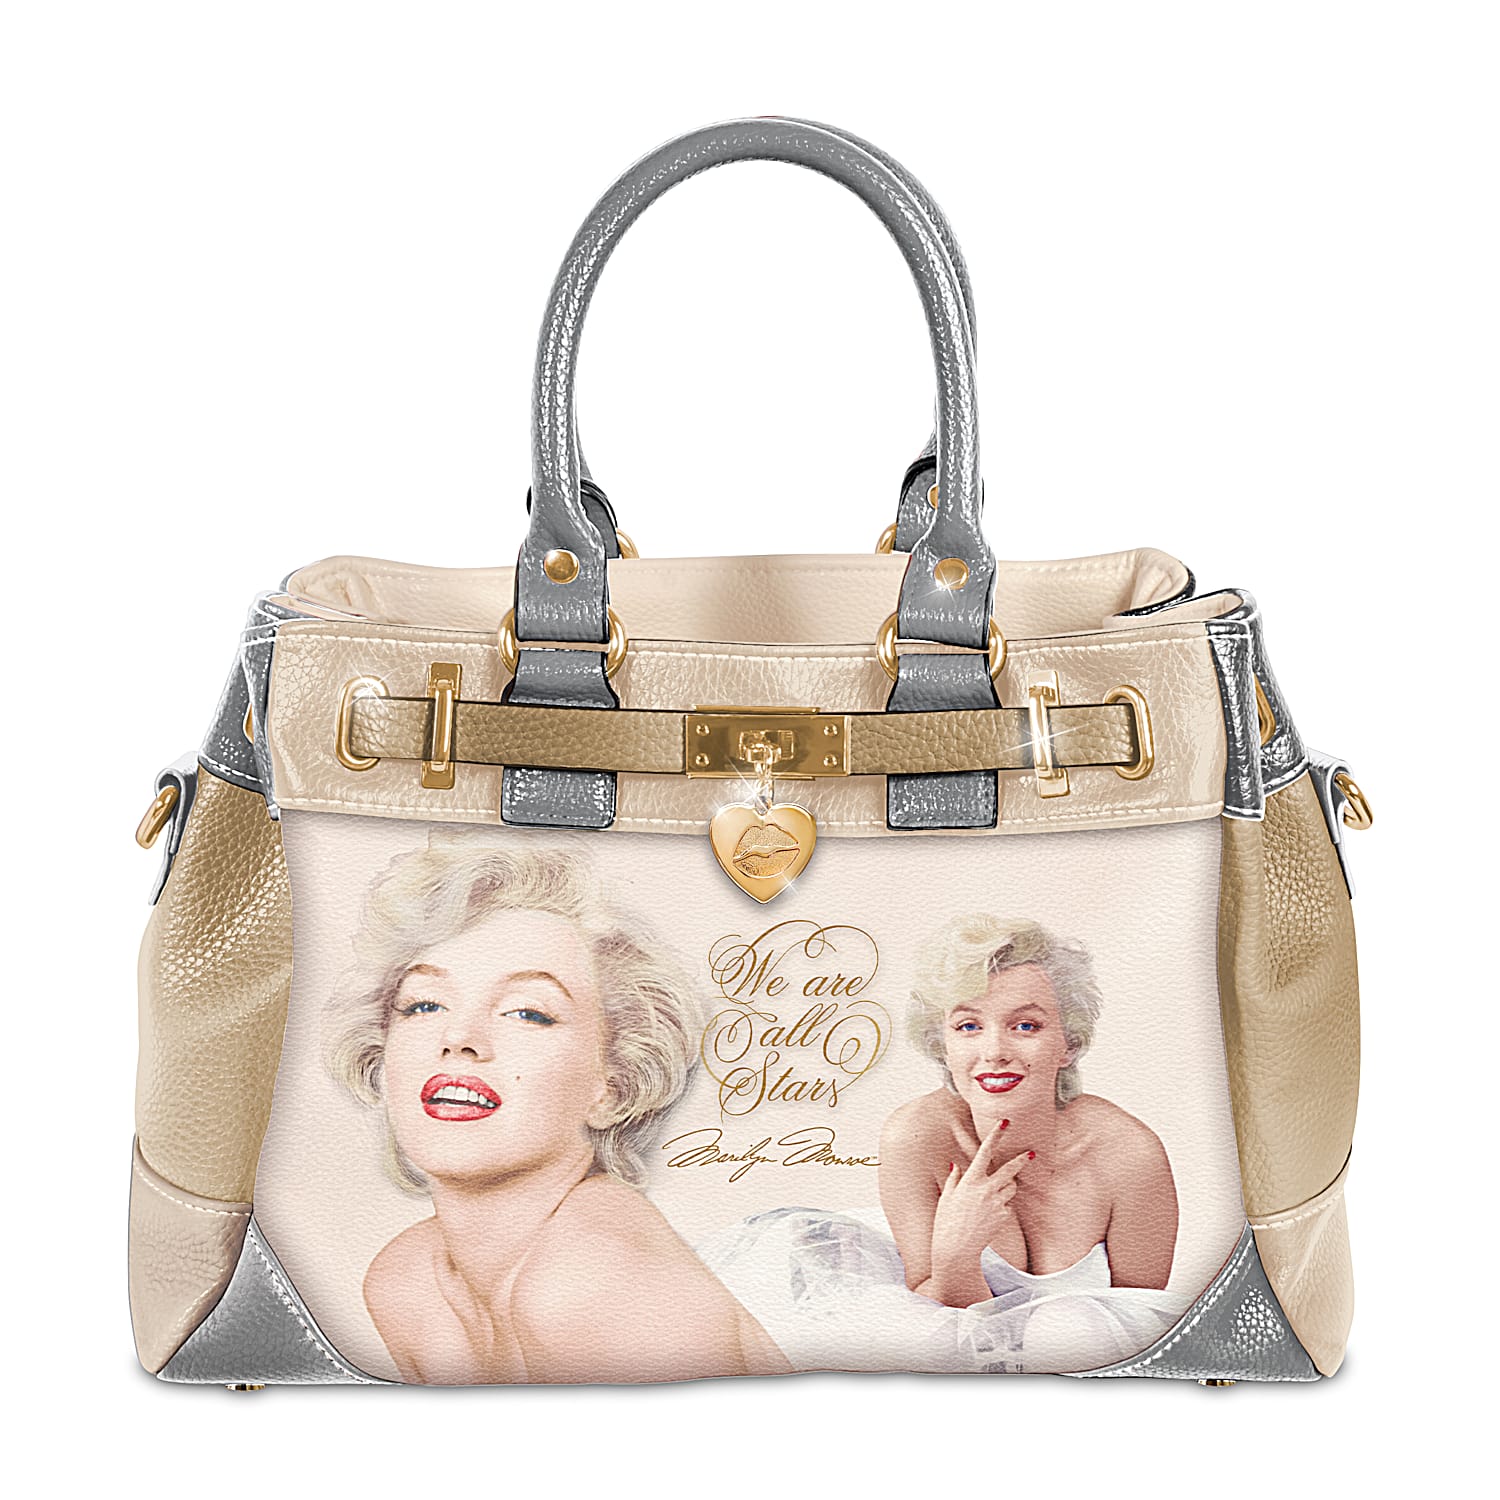 Silver Screen Starlet Faux Leather Handbag Featuring Images Of